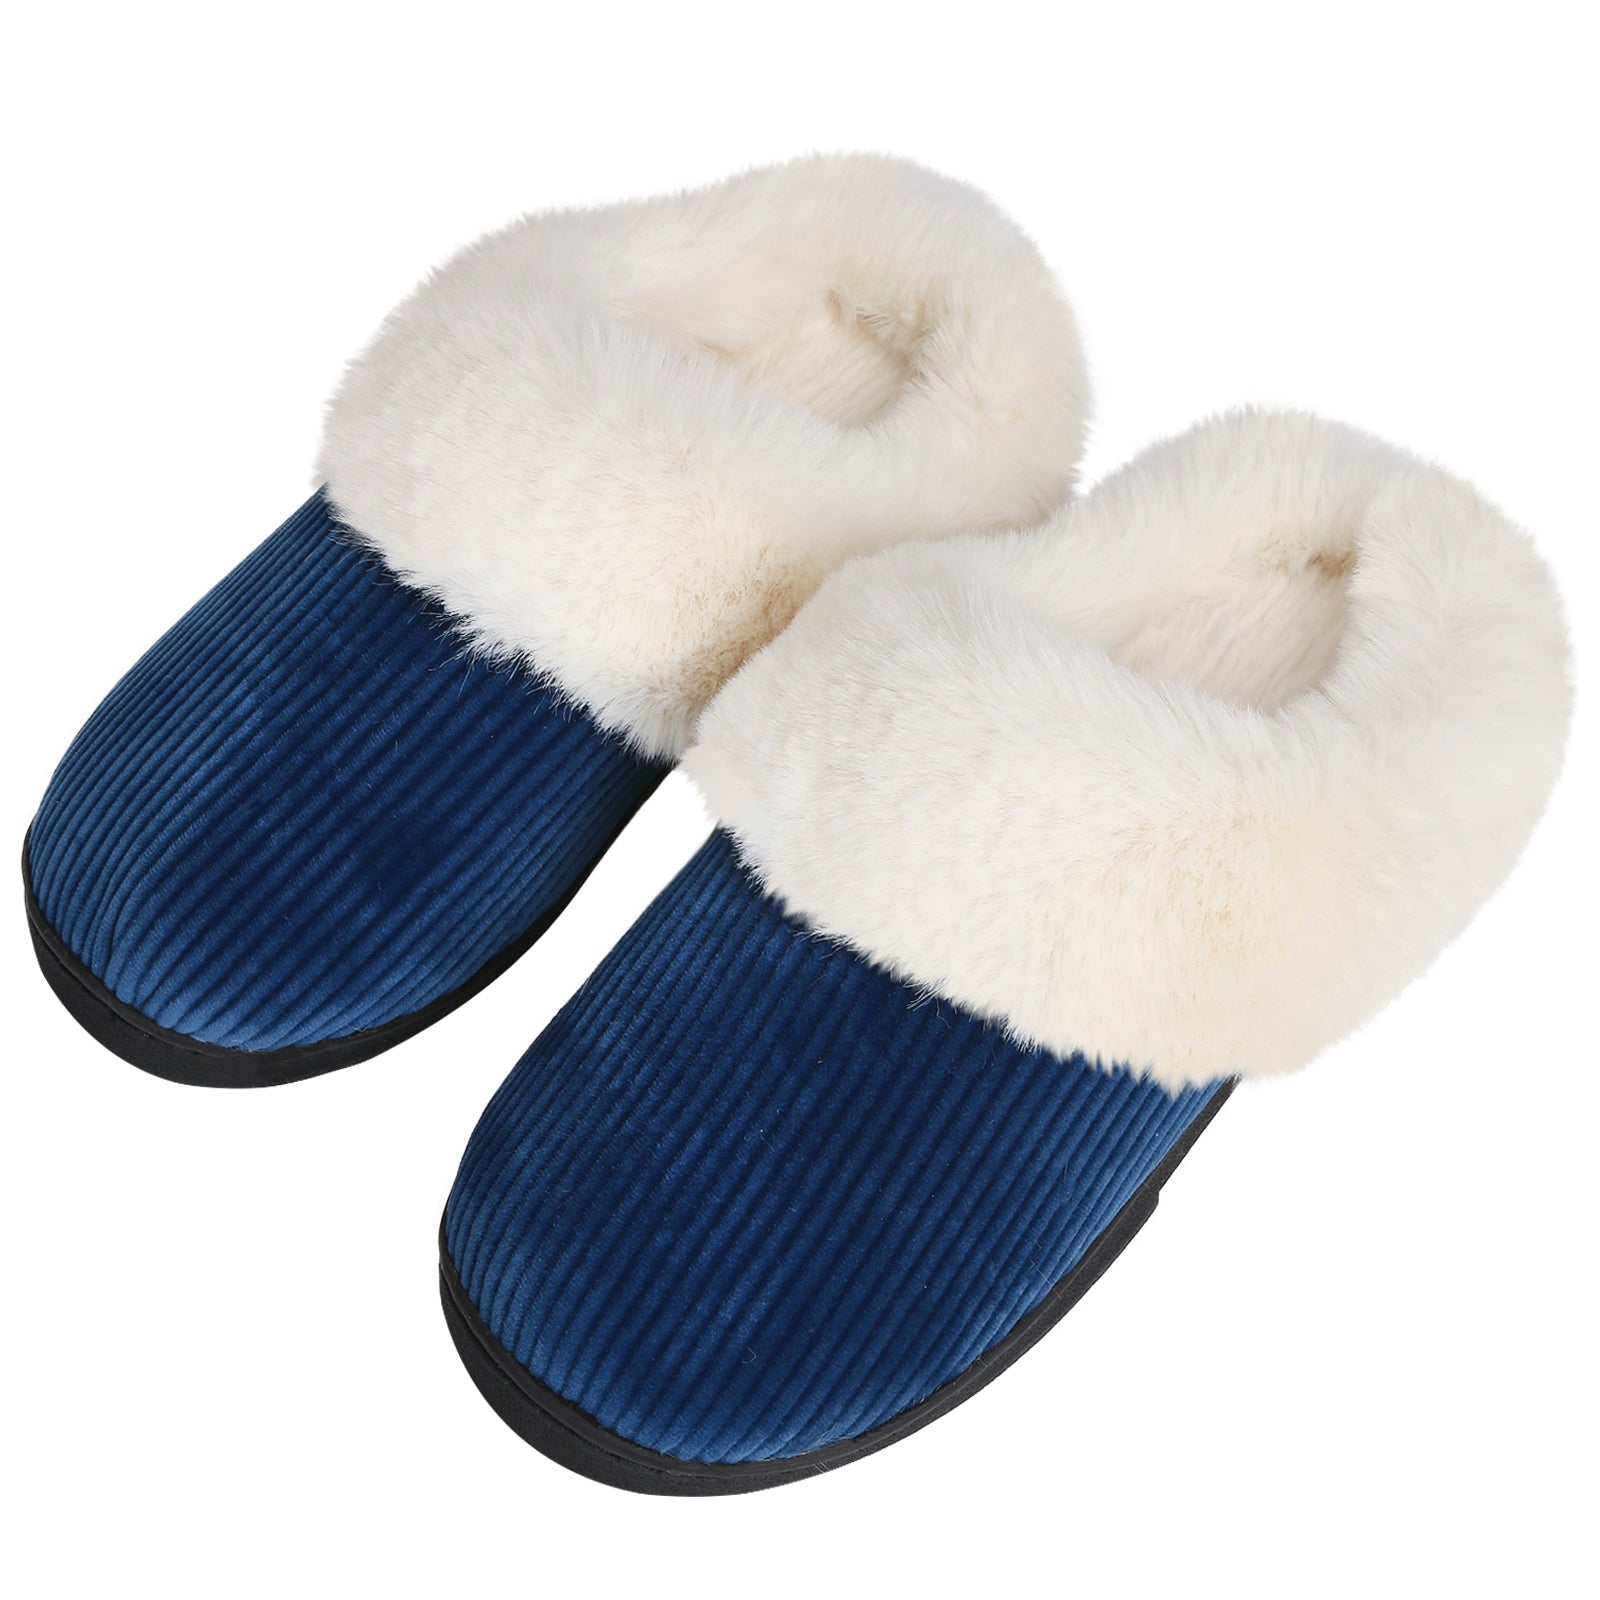 Faux Fur Heeled Slippers Non-Skid Soft Memory Foam Slip-on Cute Casual Home Shoes Fuzzy Comfy Cozy Warm Winter for Women Indoor